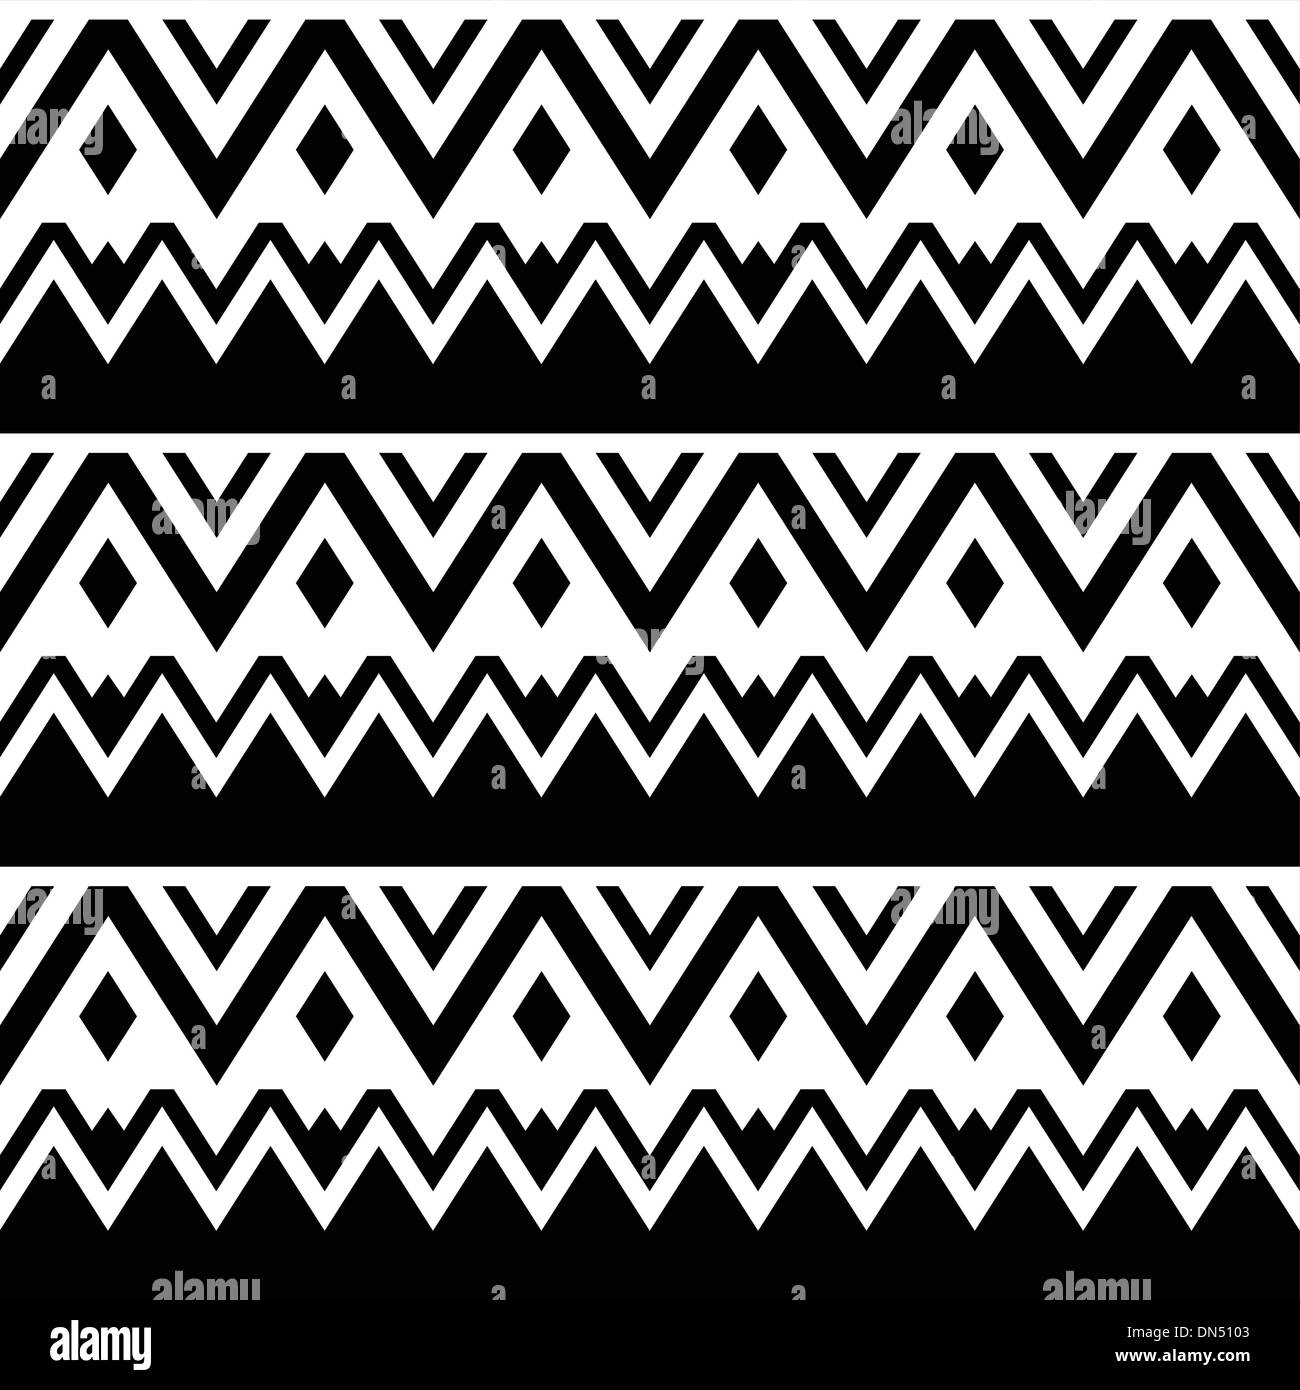 Cute Aztec Patterns Black And White